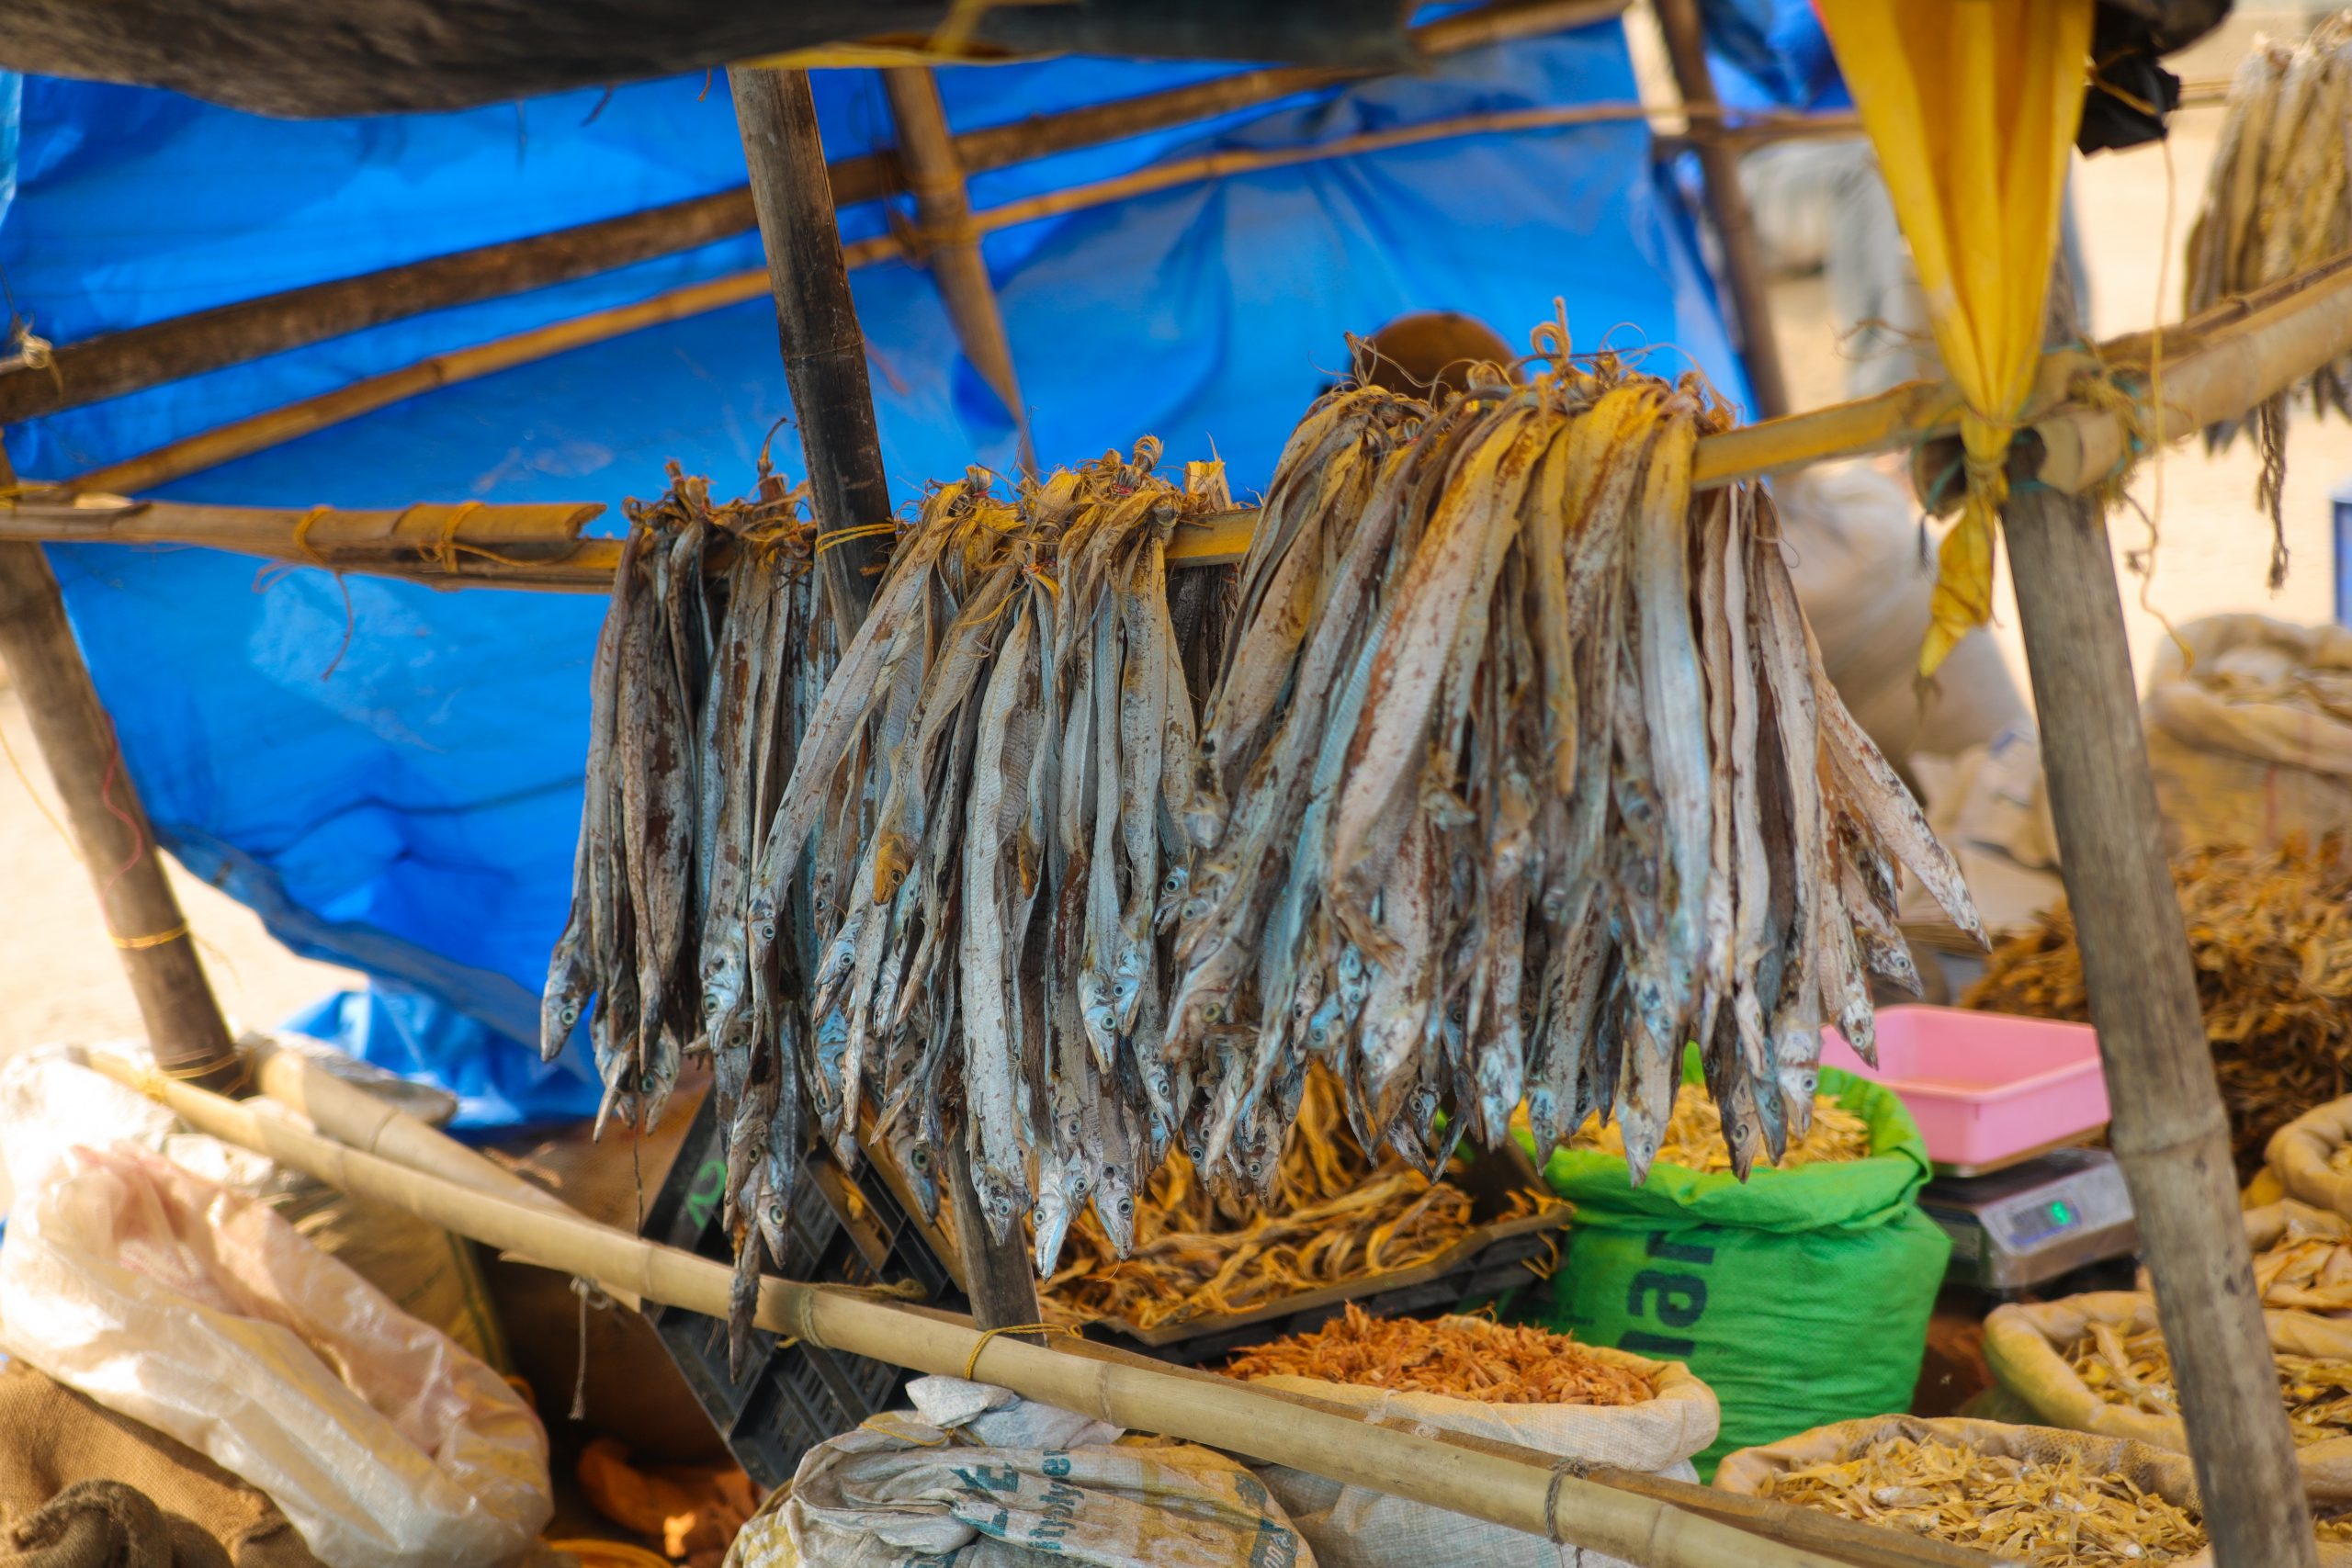 Fish in a market